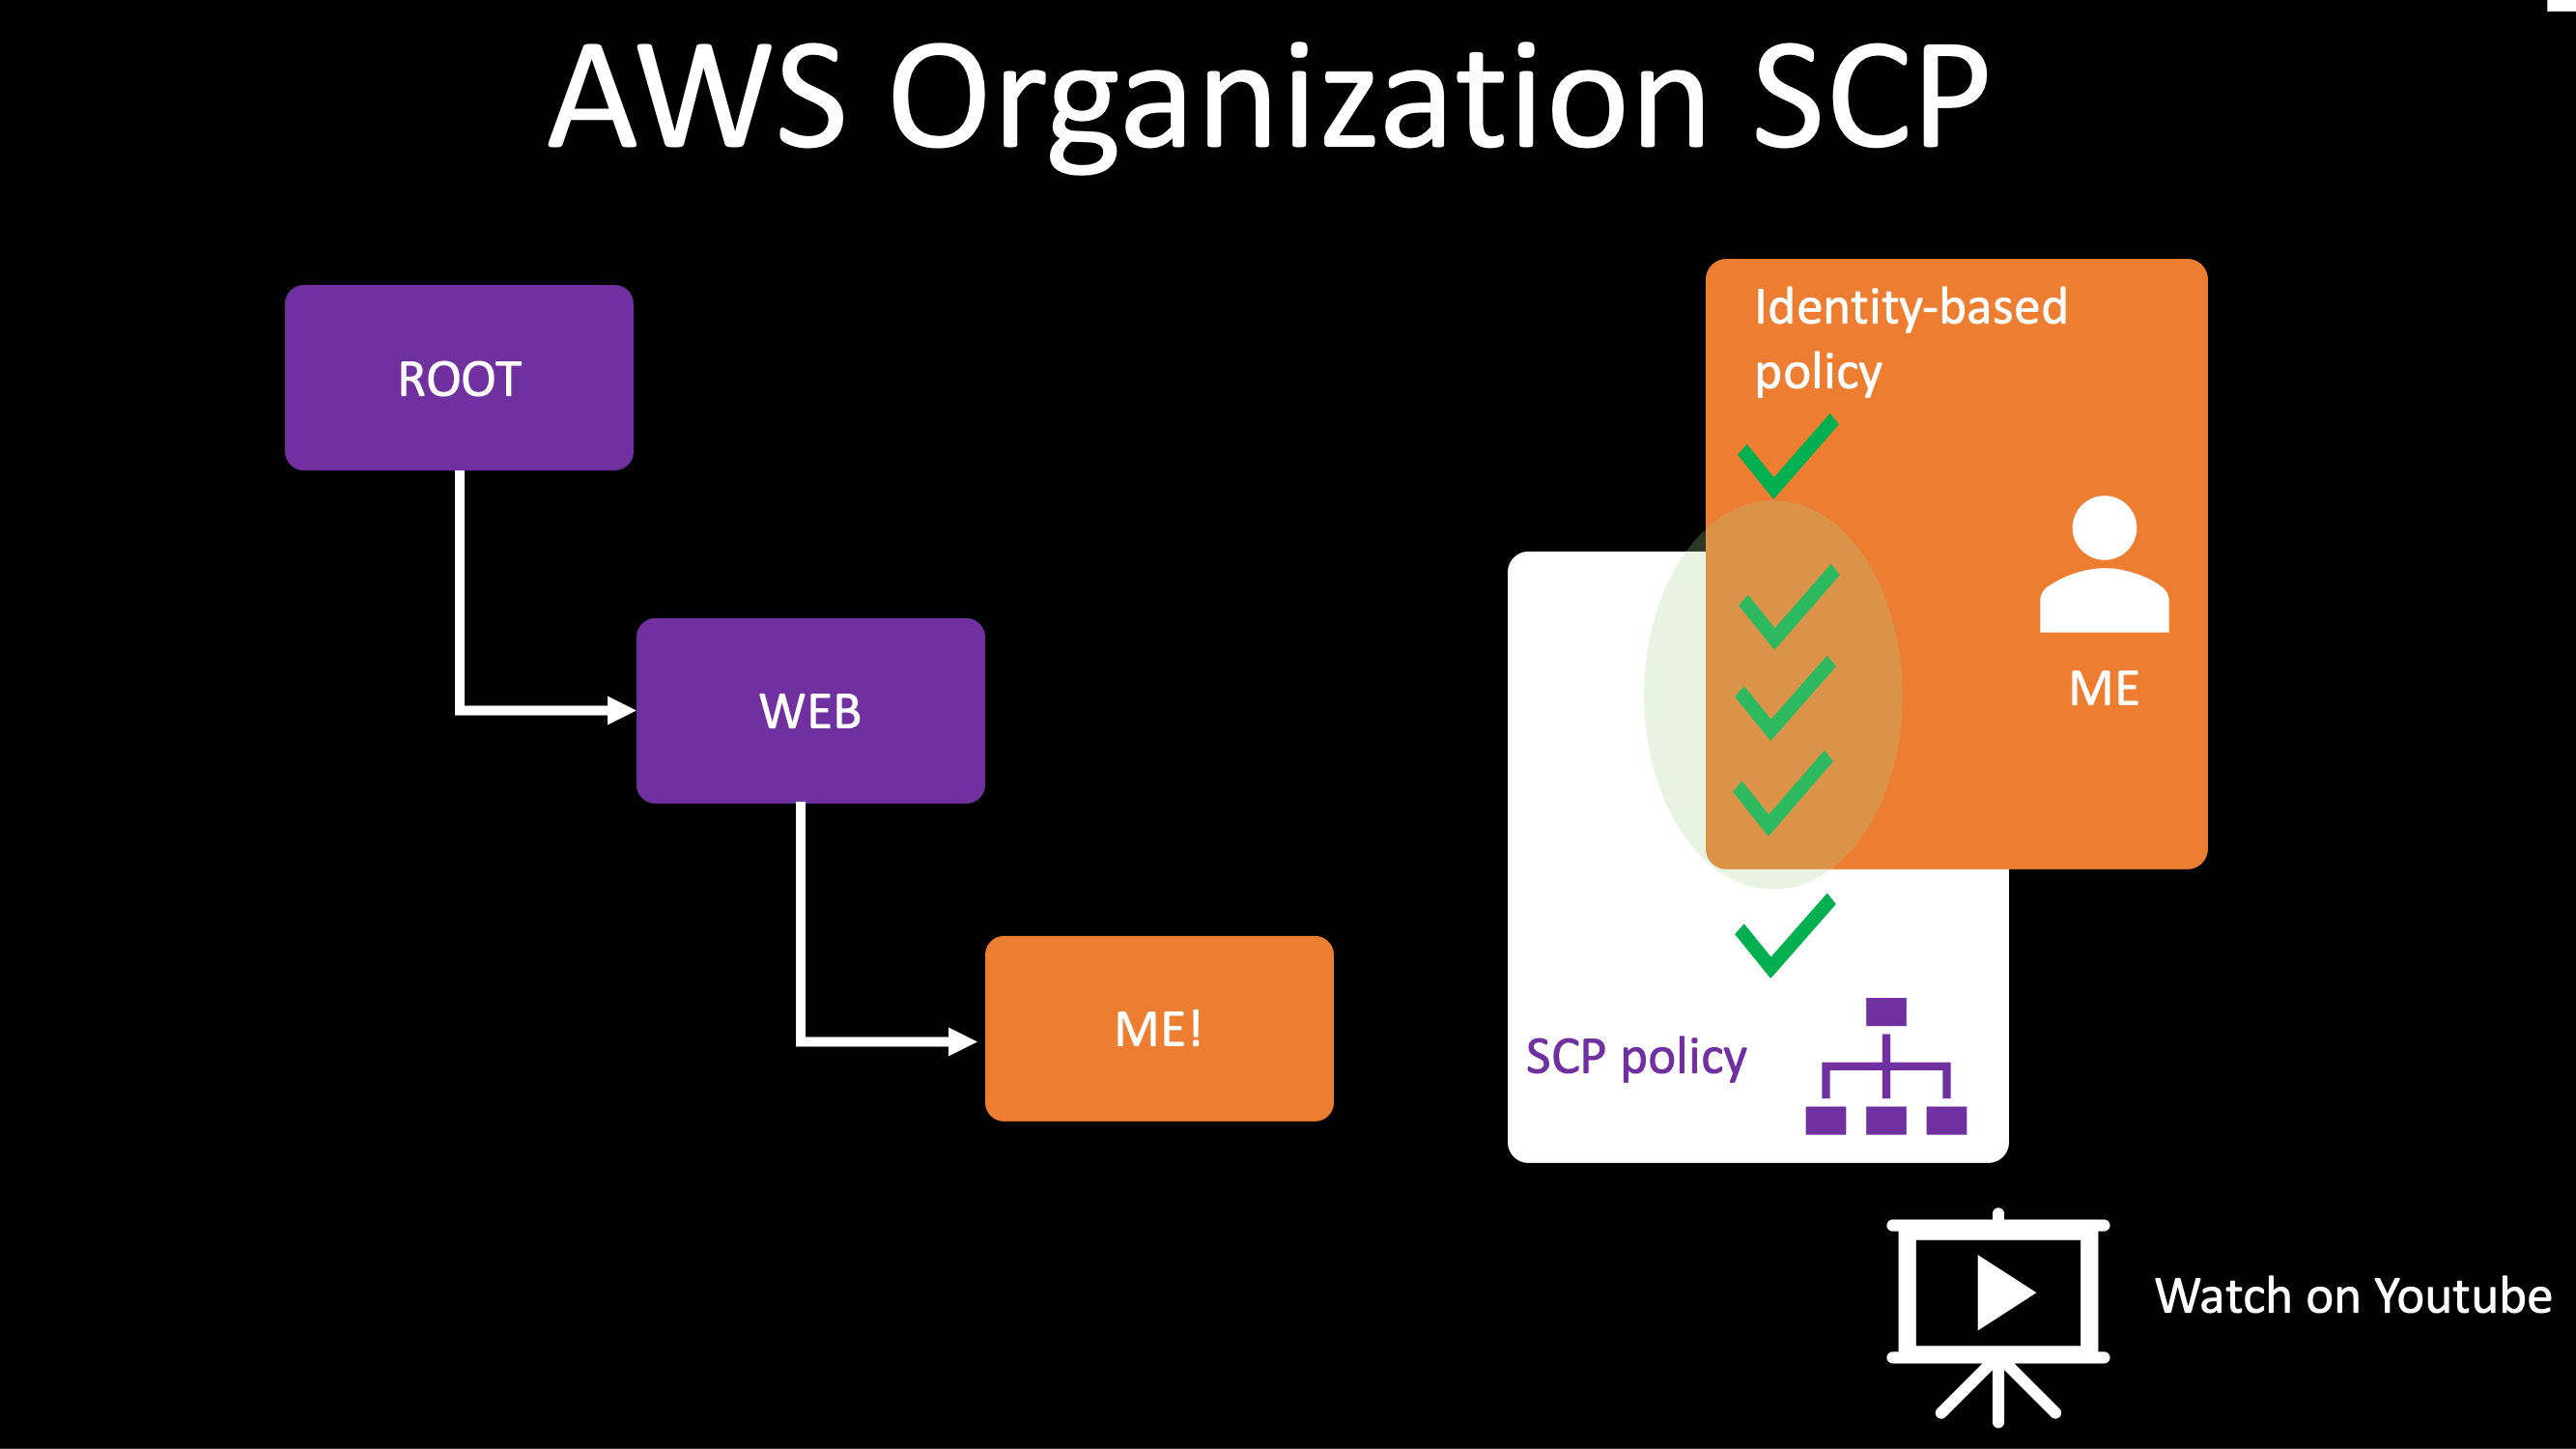 AWS Organizations SCP (Service Control Policy)